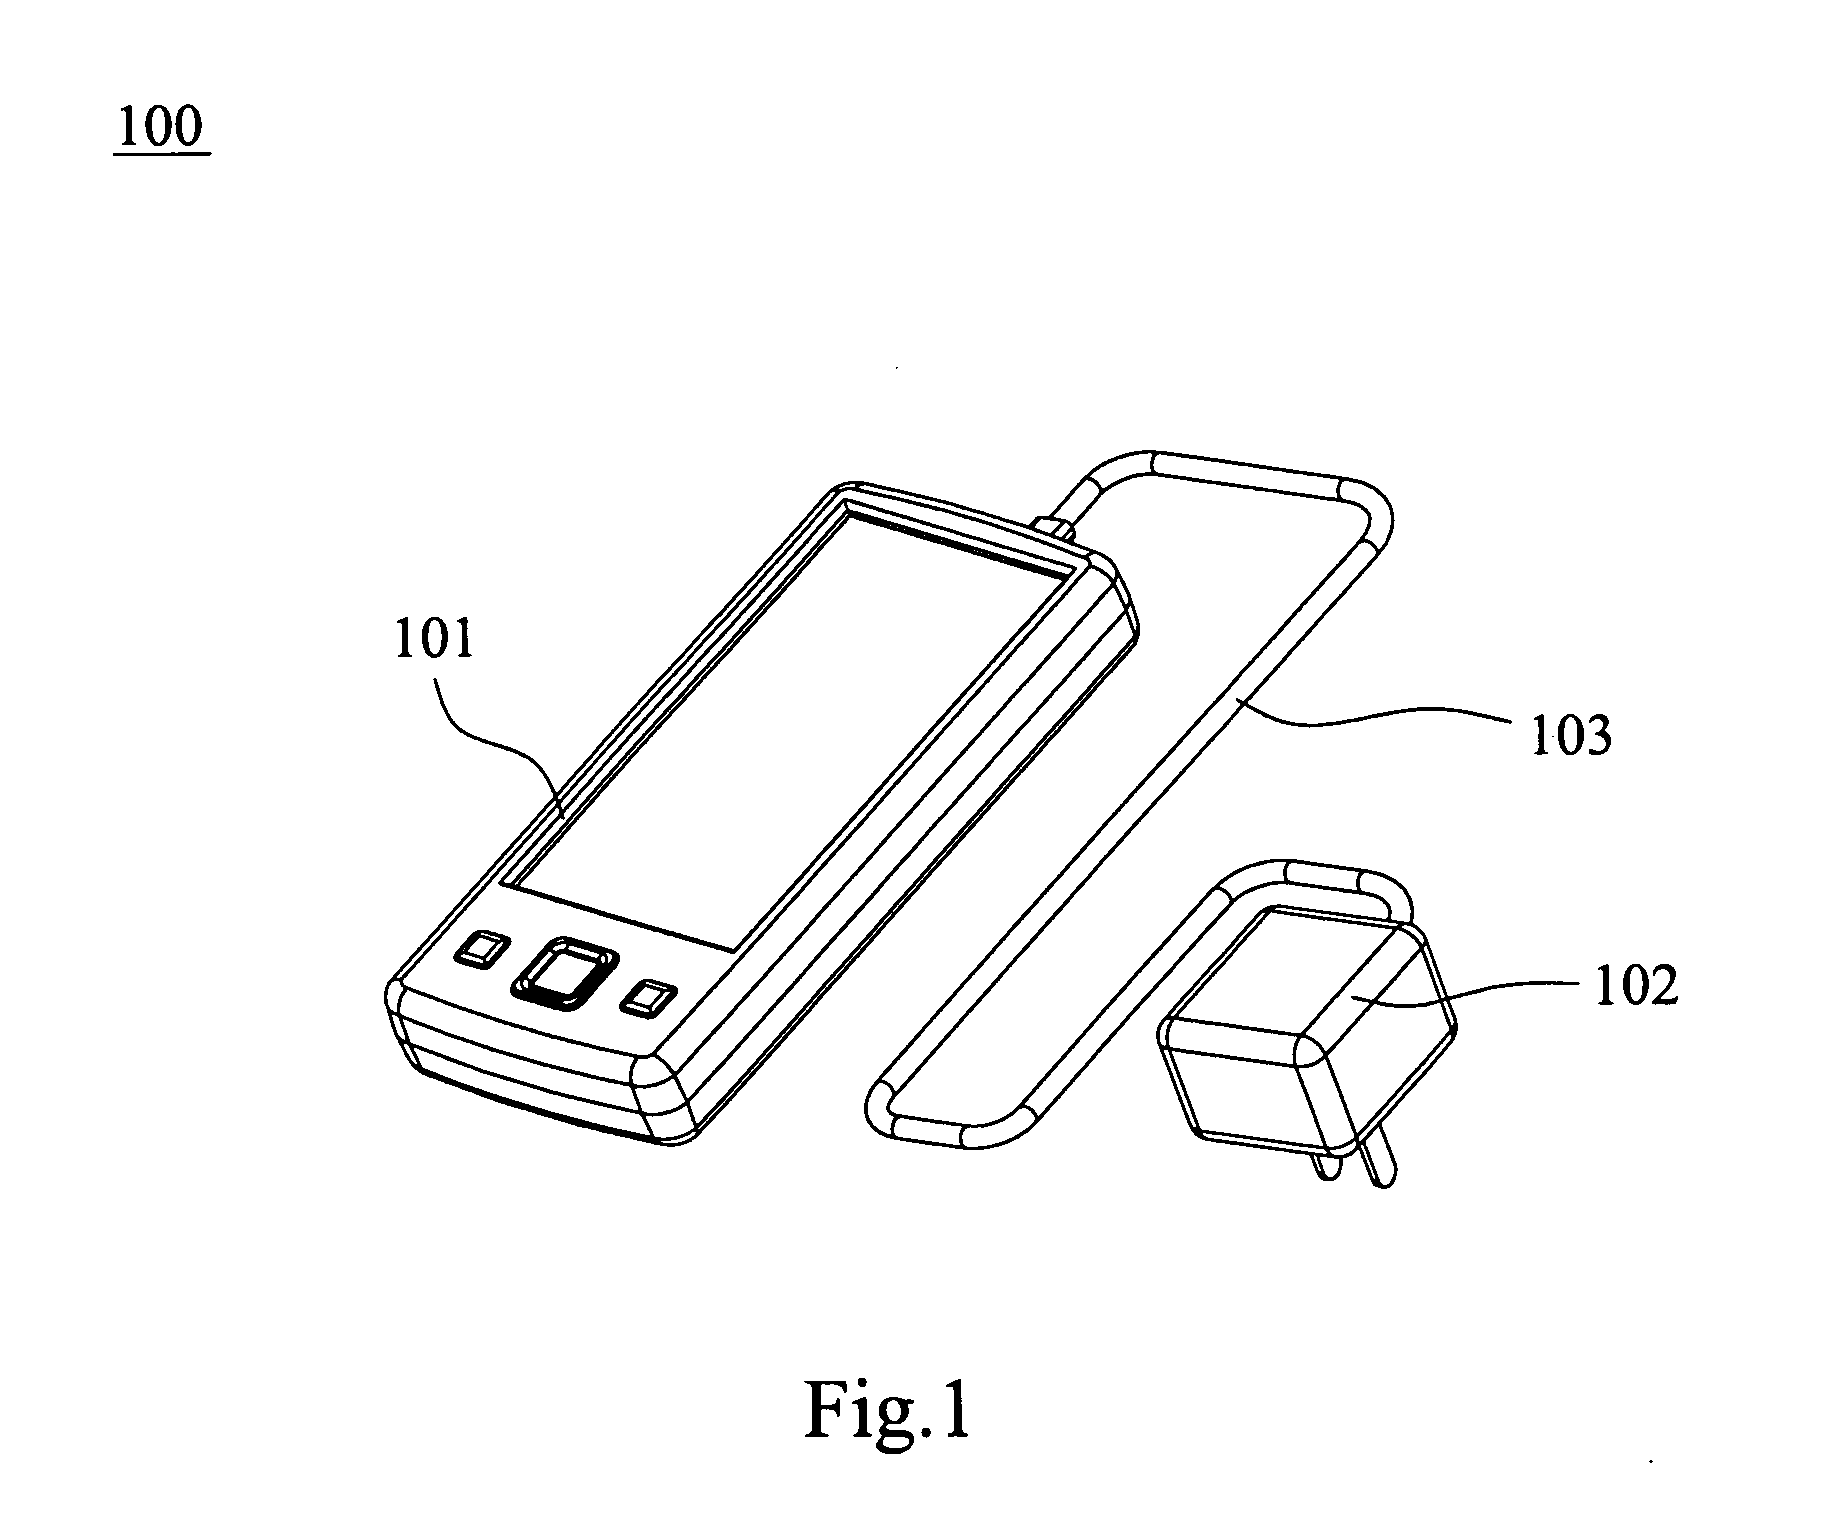 Wireless charging system, battery with wireless charging function and electronic devices with the same